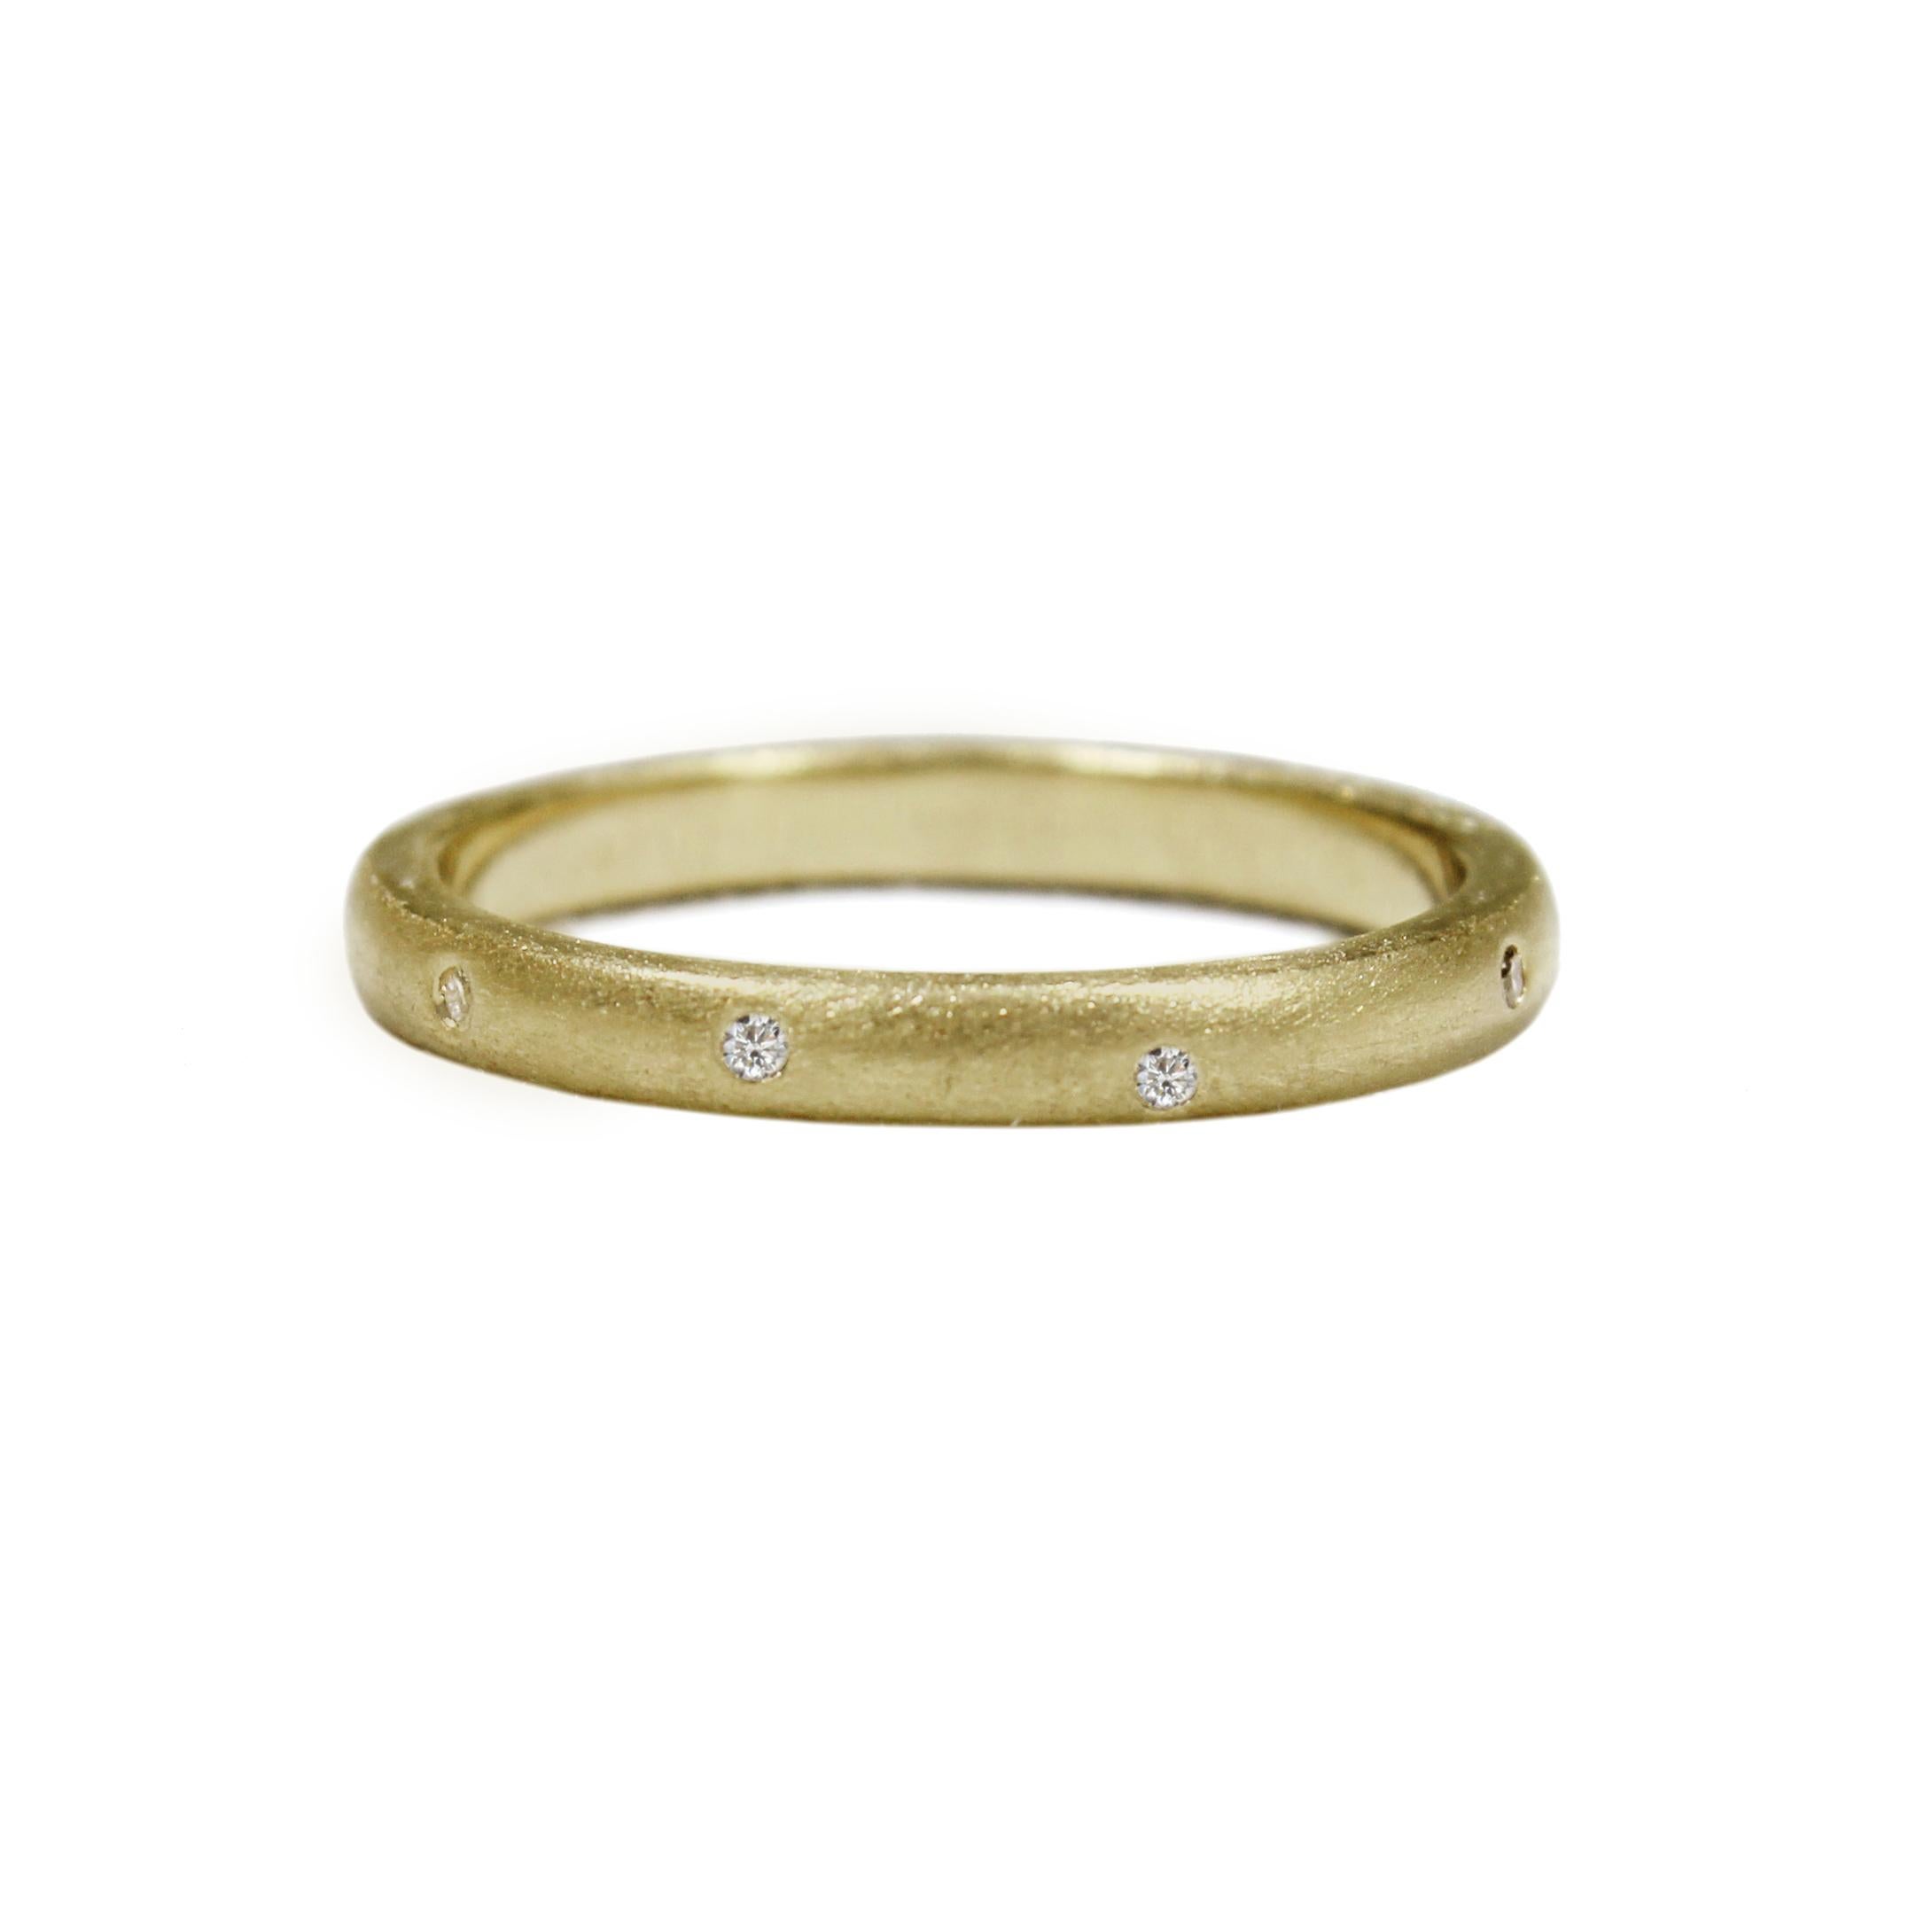 Leader of the stack! The ring you've been waiting for -- our simple stacking ring with 9 irregularly sprinkled little diamonds in matte 14k gold. Stunning on its own or as one of the pack (stack)! This ring works beautifully as a wedding band, as an